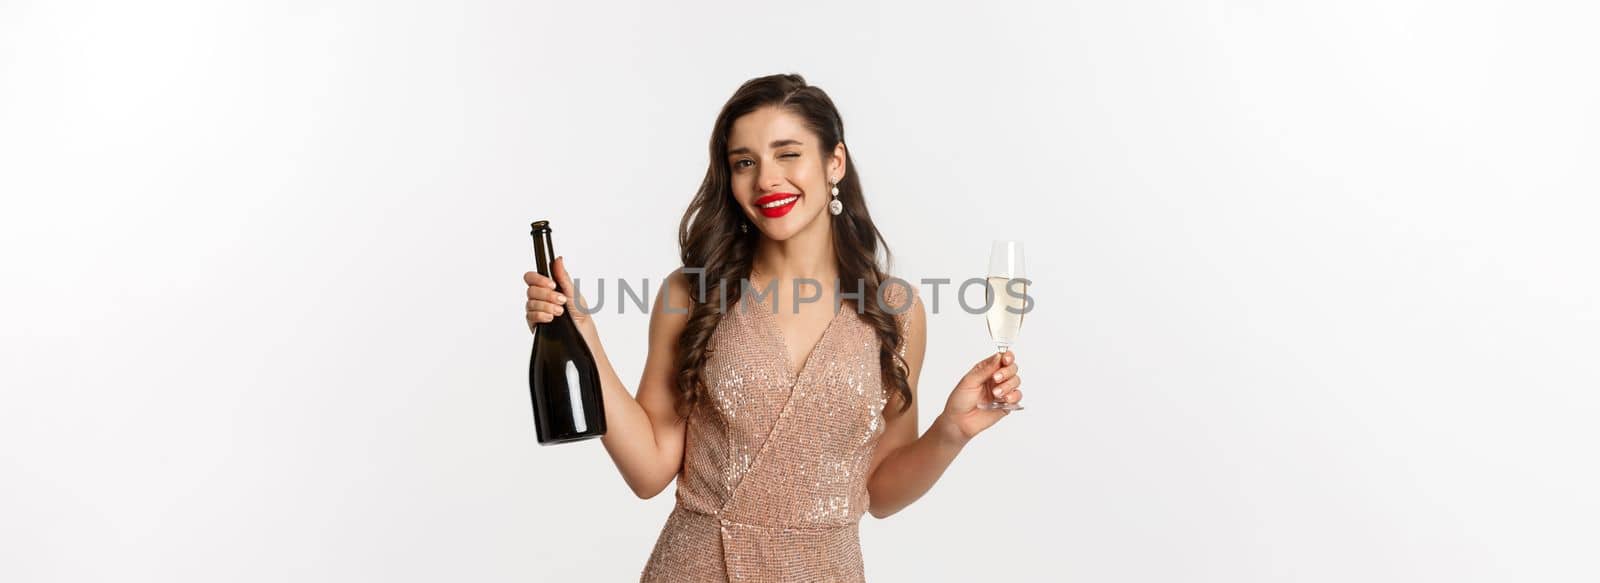 Winter holidays celebration concept. Beautiful woman enjoying Christmas and New Year party, drinking champagne and winking at camera, standing in elegant dress.